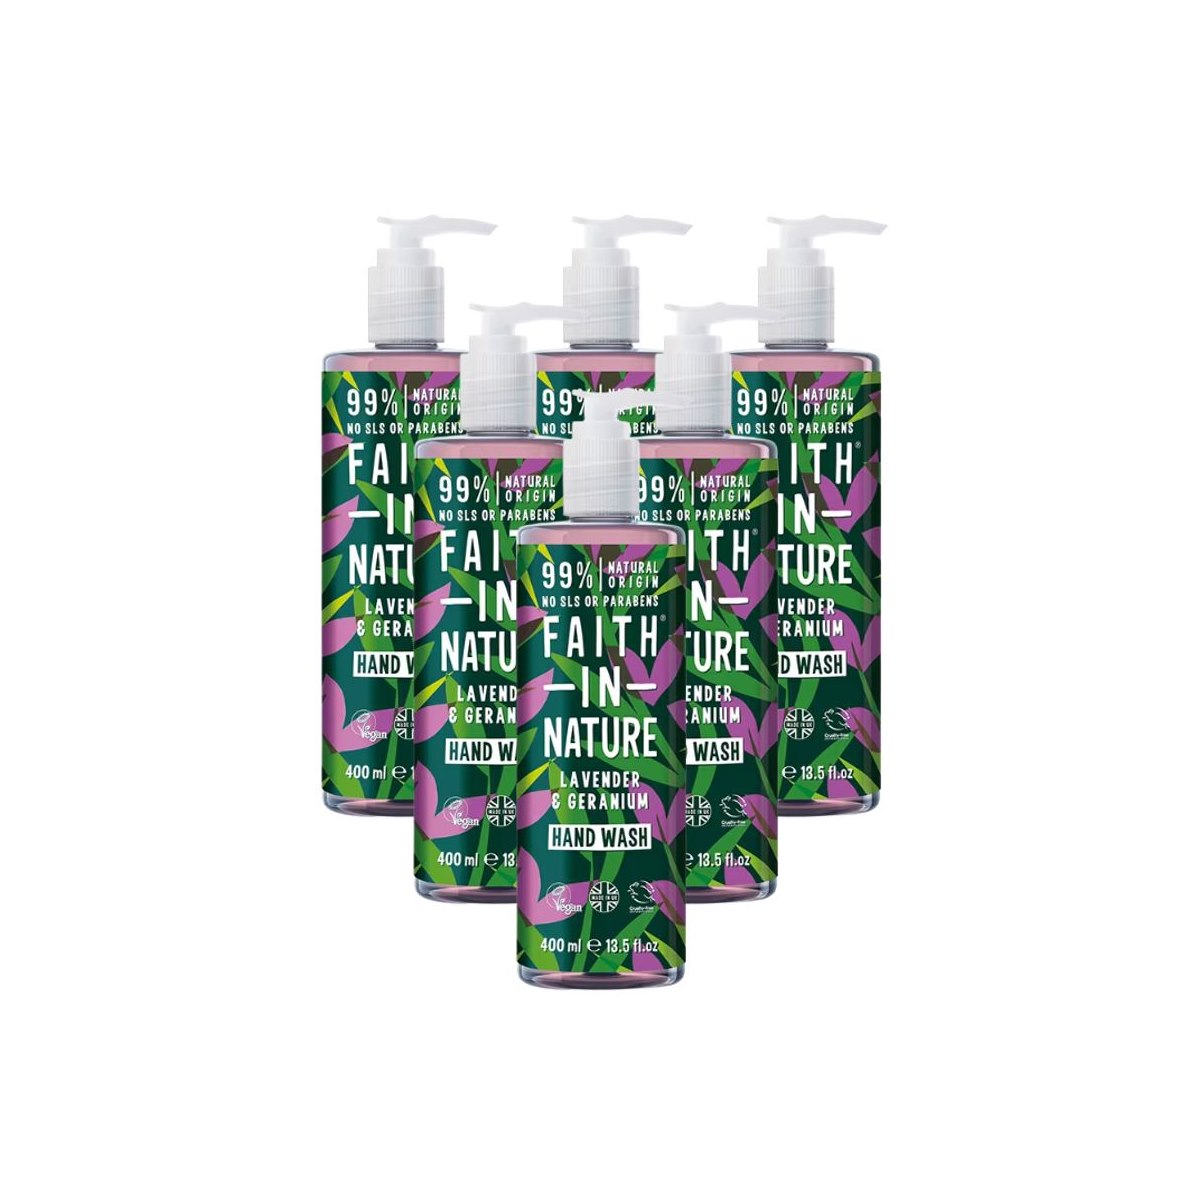 Case of 6 x Faith In Nature Soothing Hand Wash - Lavender and Geranium 400ml